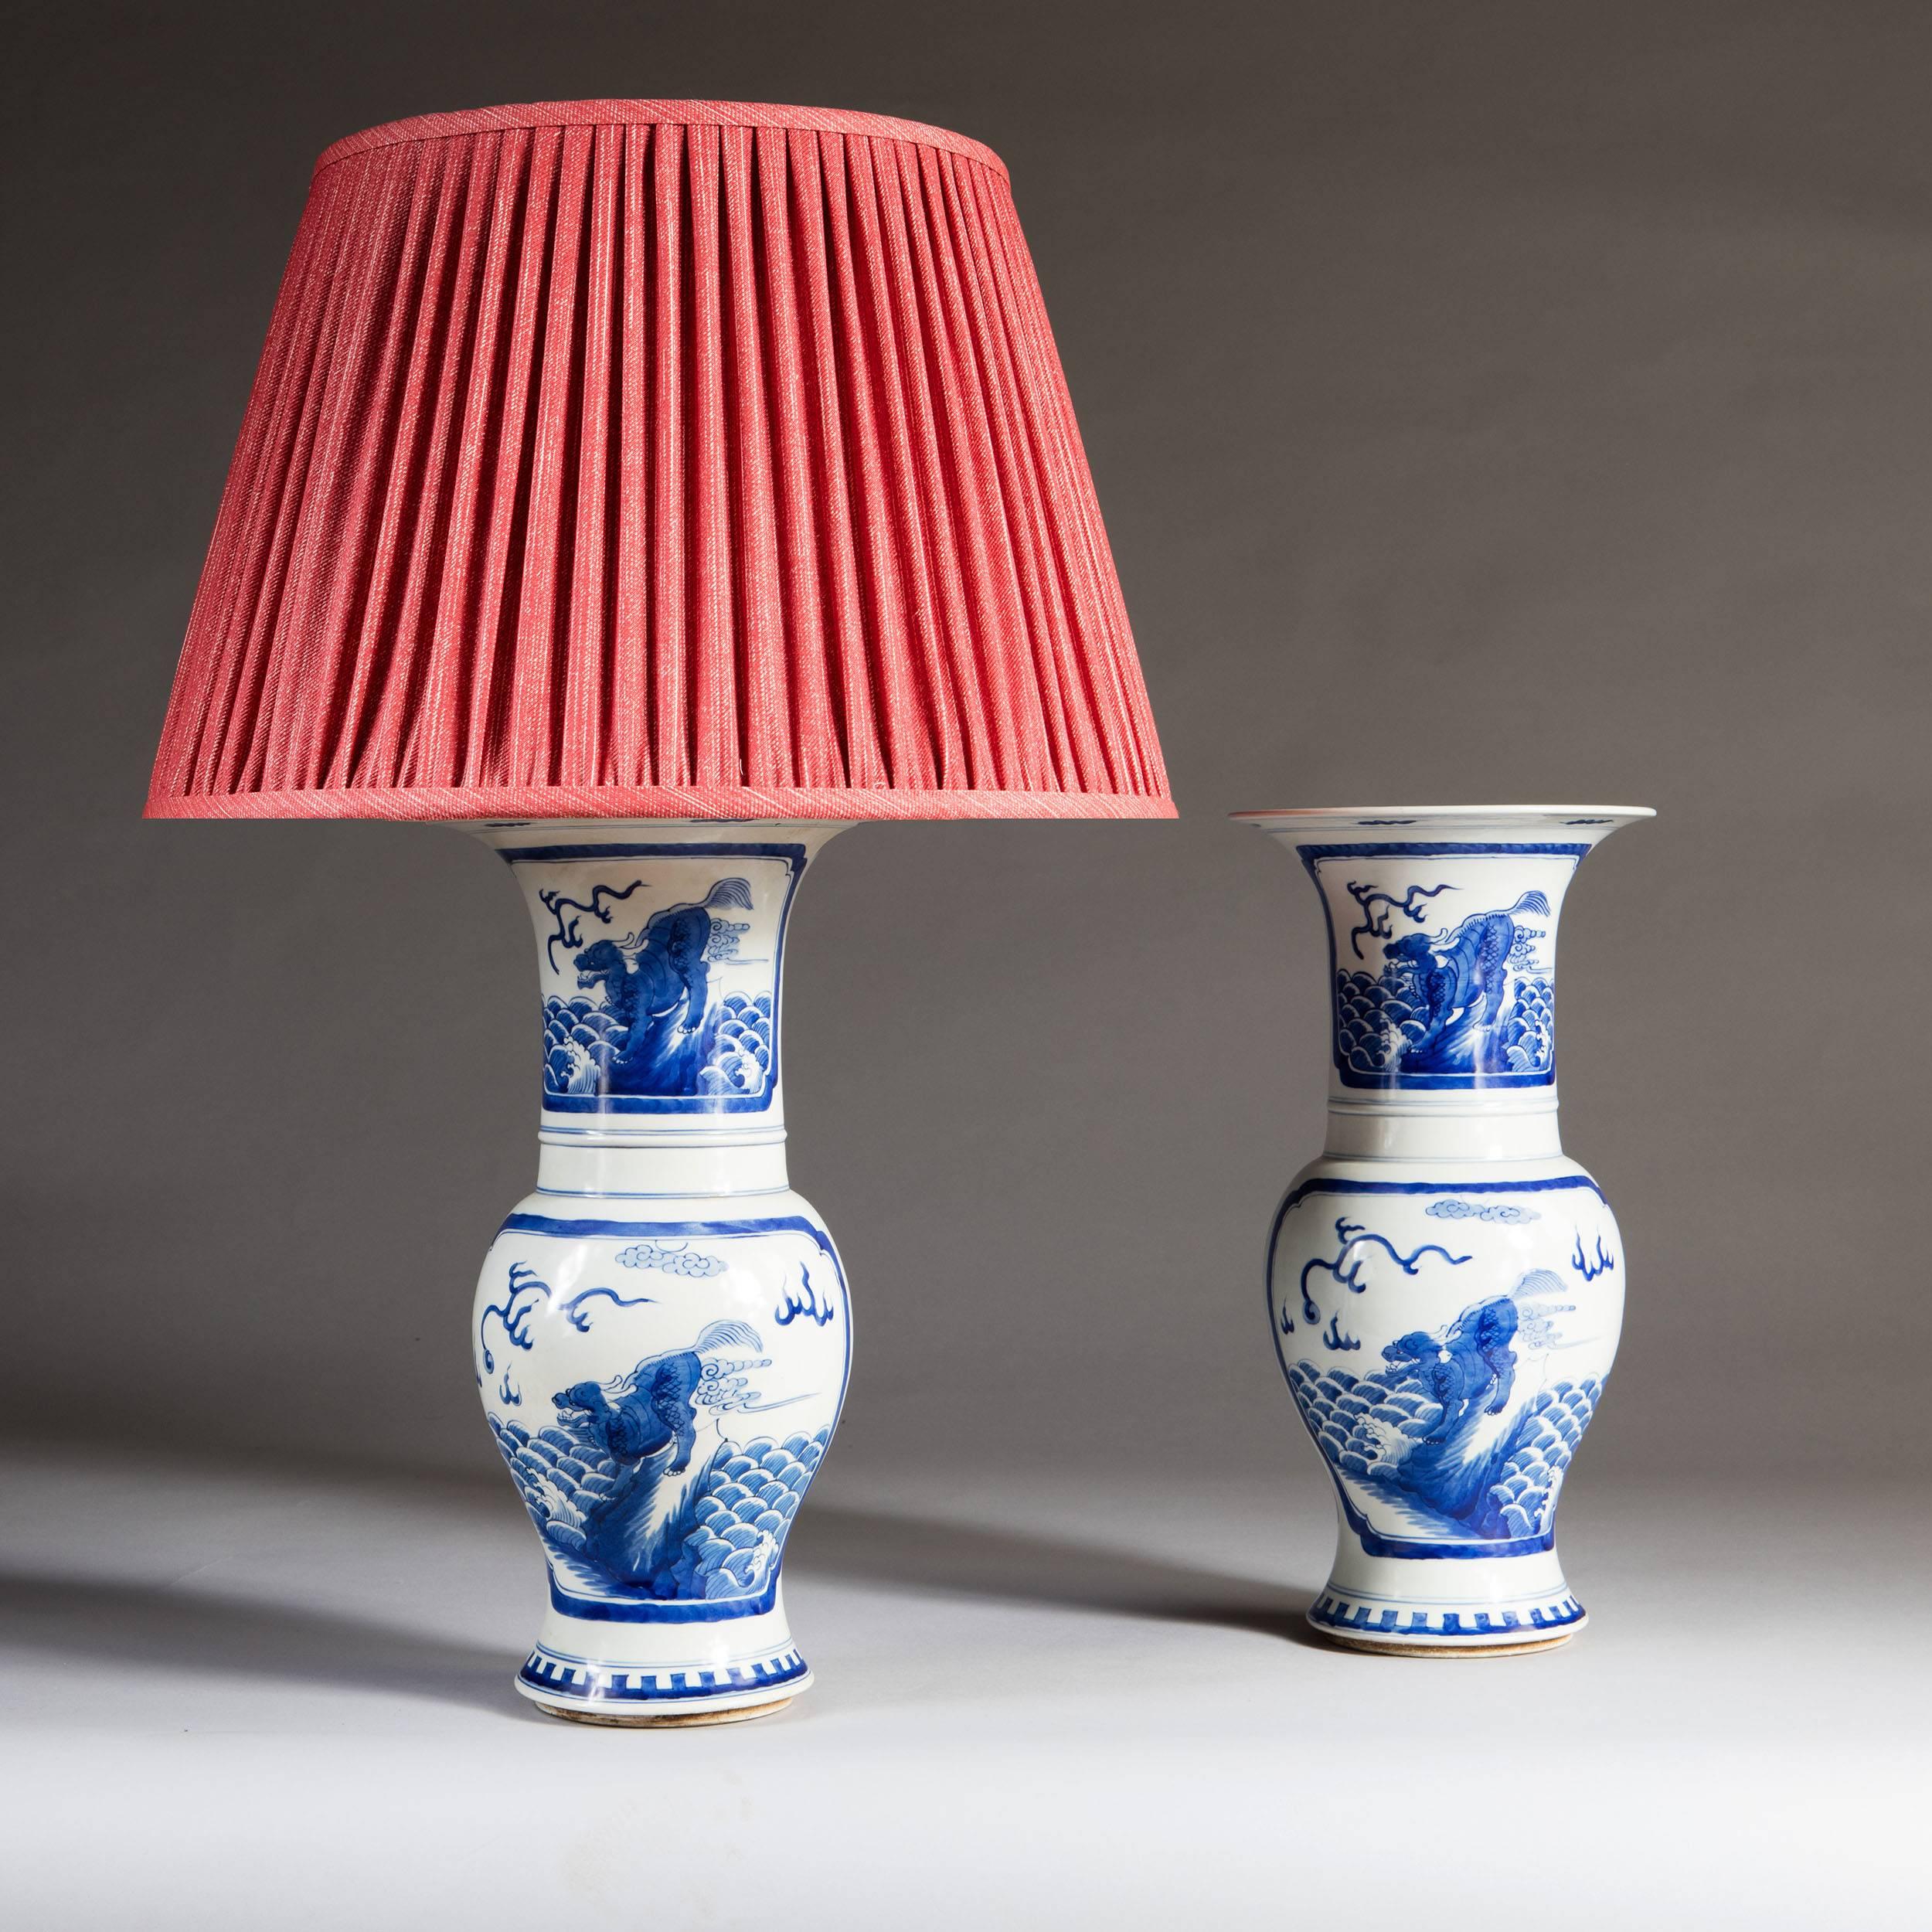 A pair of 20th century Chinese blue and white trumpet vases, decorated with cartouches depicting dragrons.